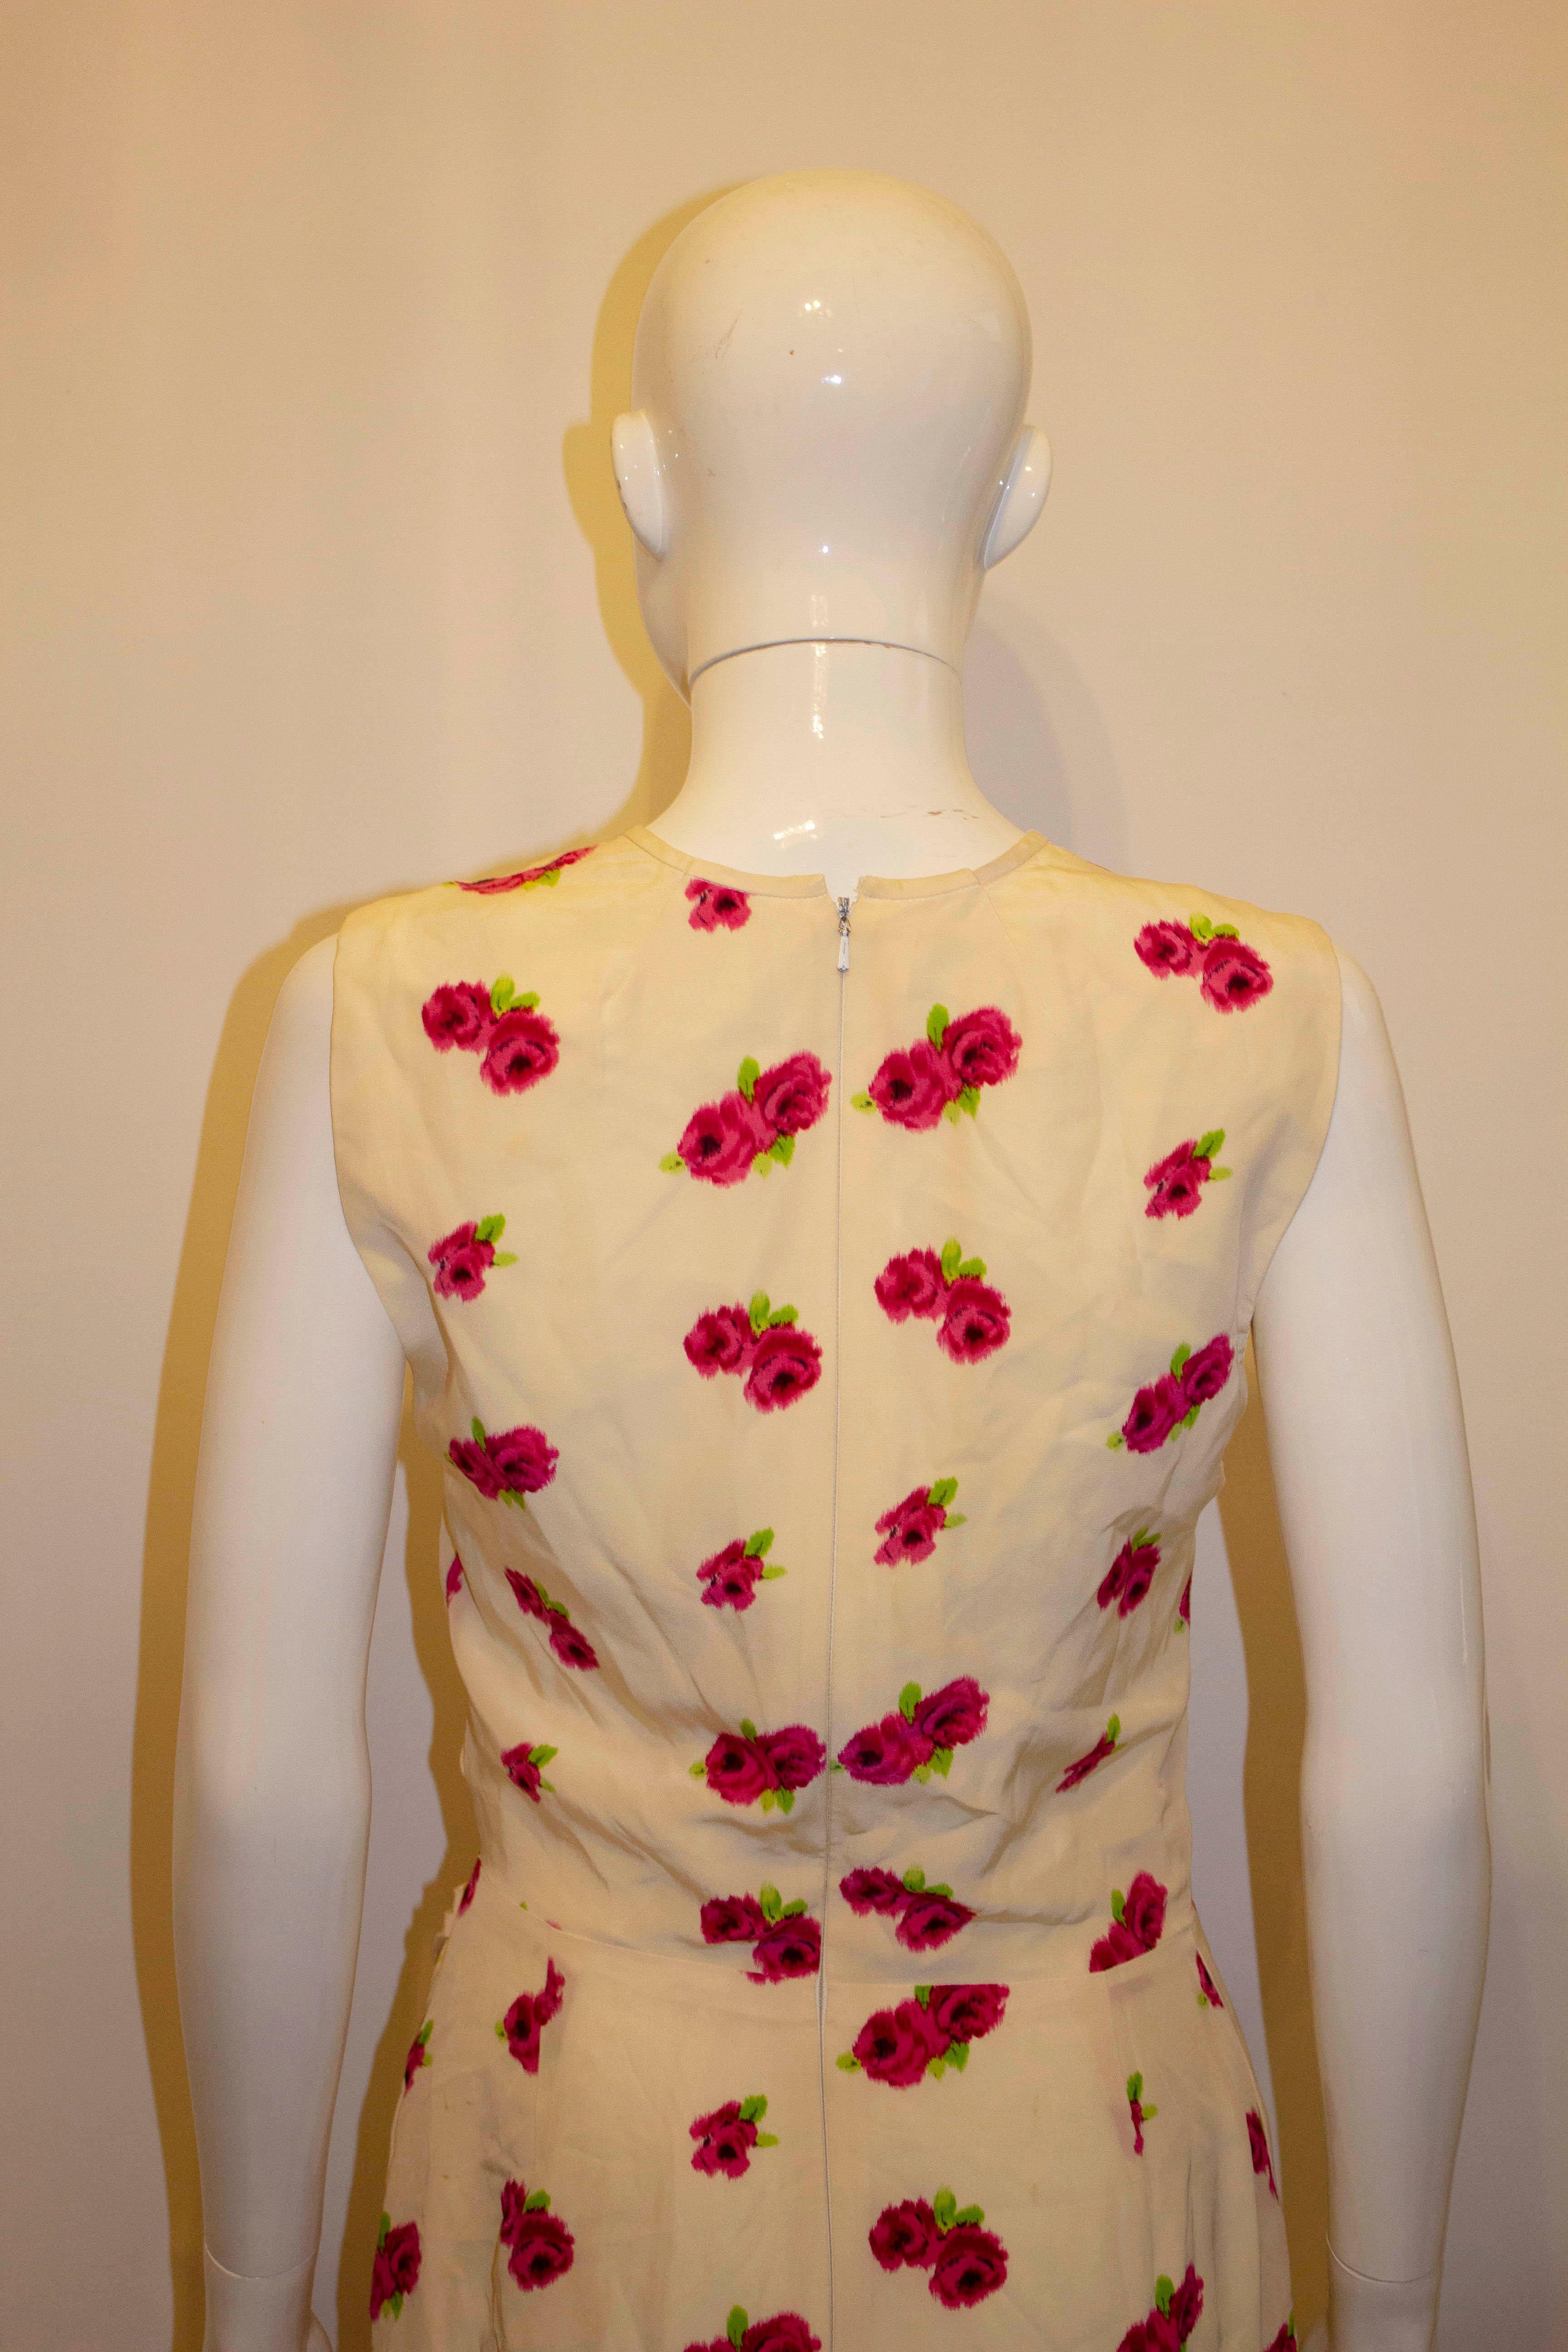 A stunning vintage silk dress by Ungaro. The dress has a white background, with a pink and green floral print, and gathering on the left hand side. The dress is lined and has a back central zip opening. Size 46 /12. Measurements : Bust 36'', length